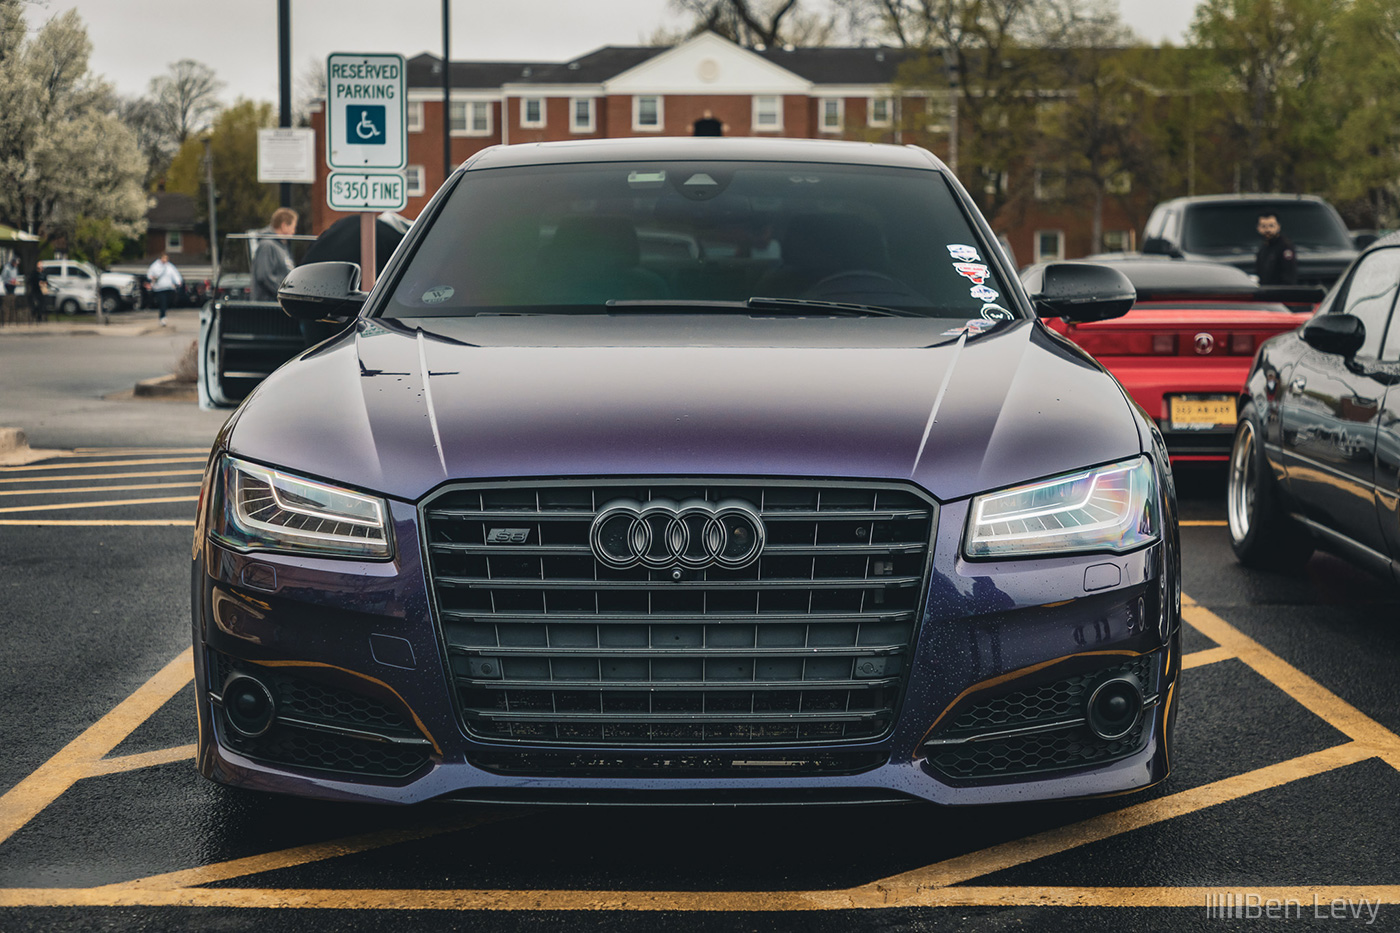 Front Grill of Purple Audi S8